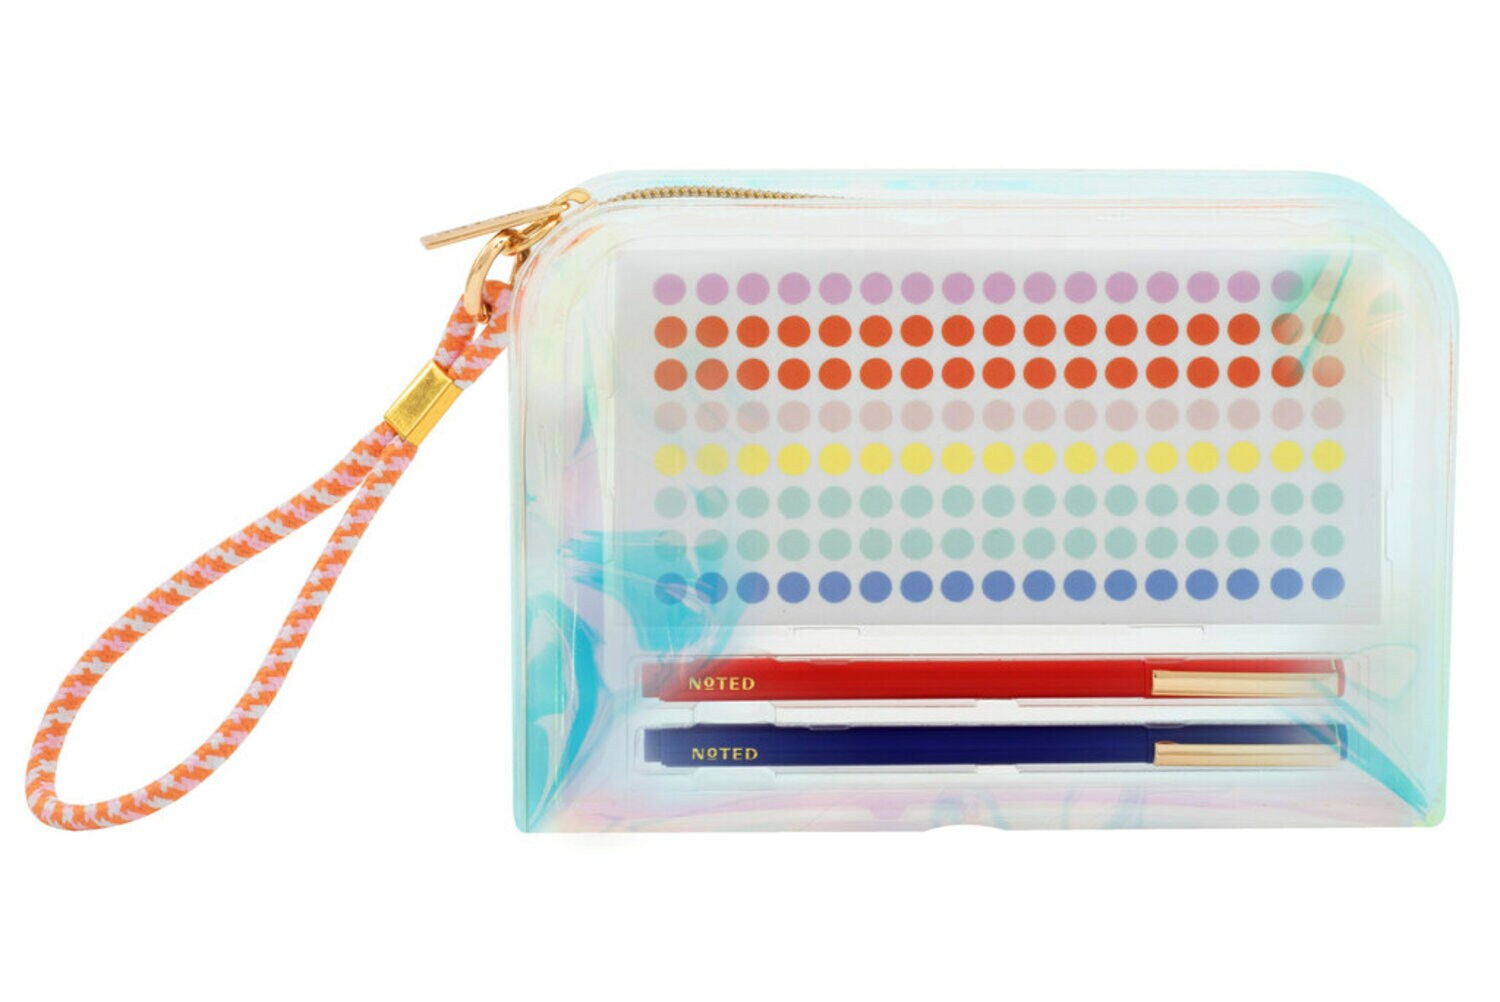 7100316223 - Post-it Pen Pouch, Pens, and Stickers Set NTD8-SET-1